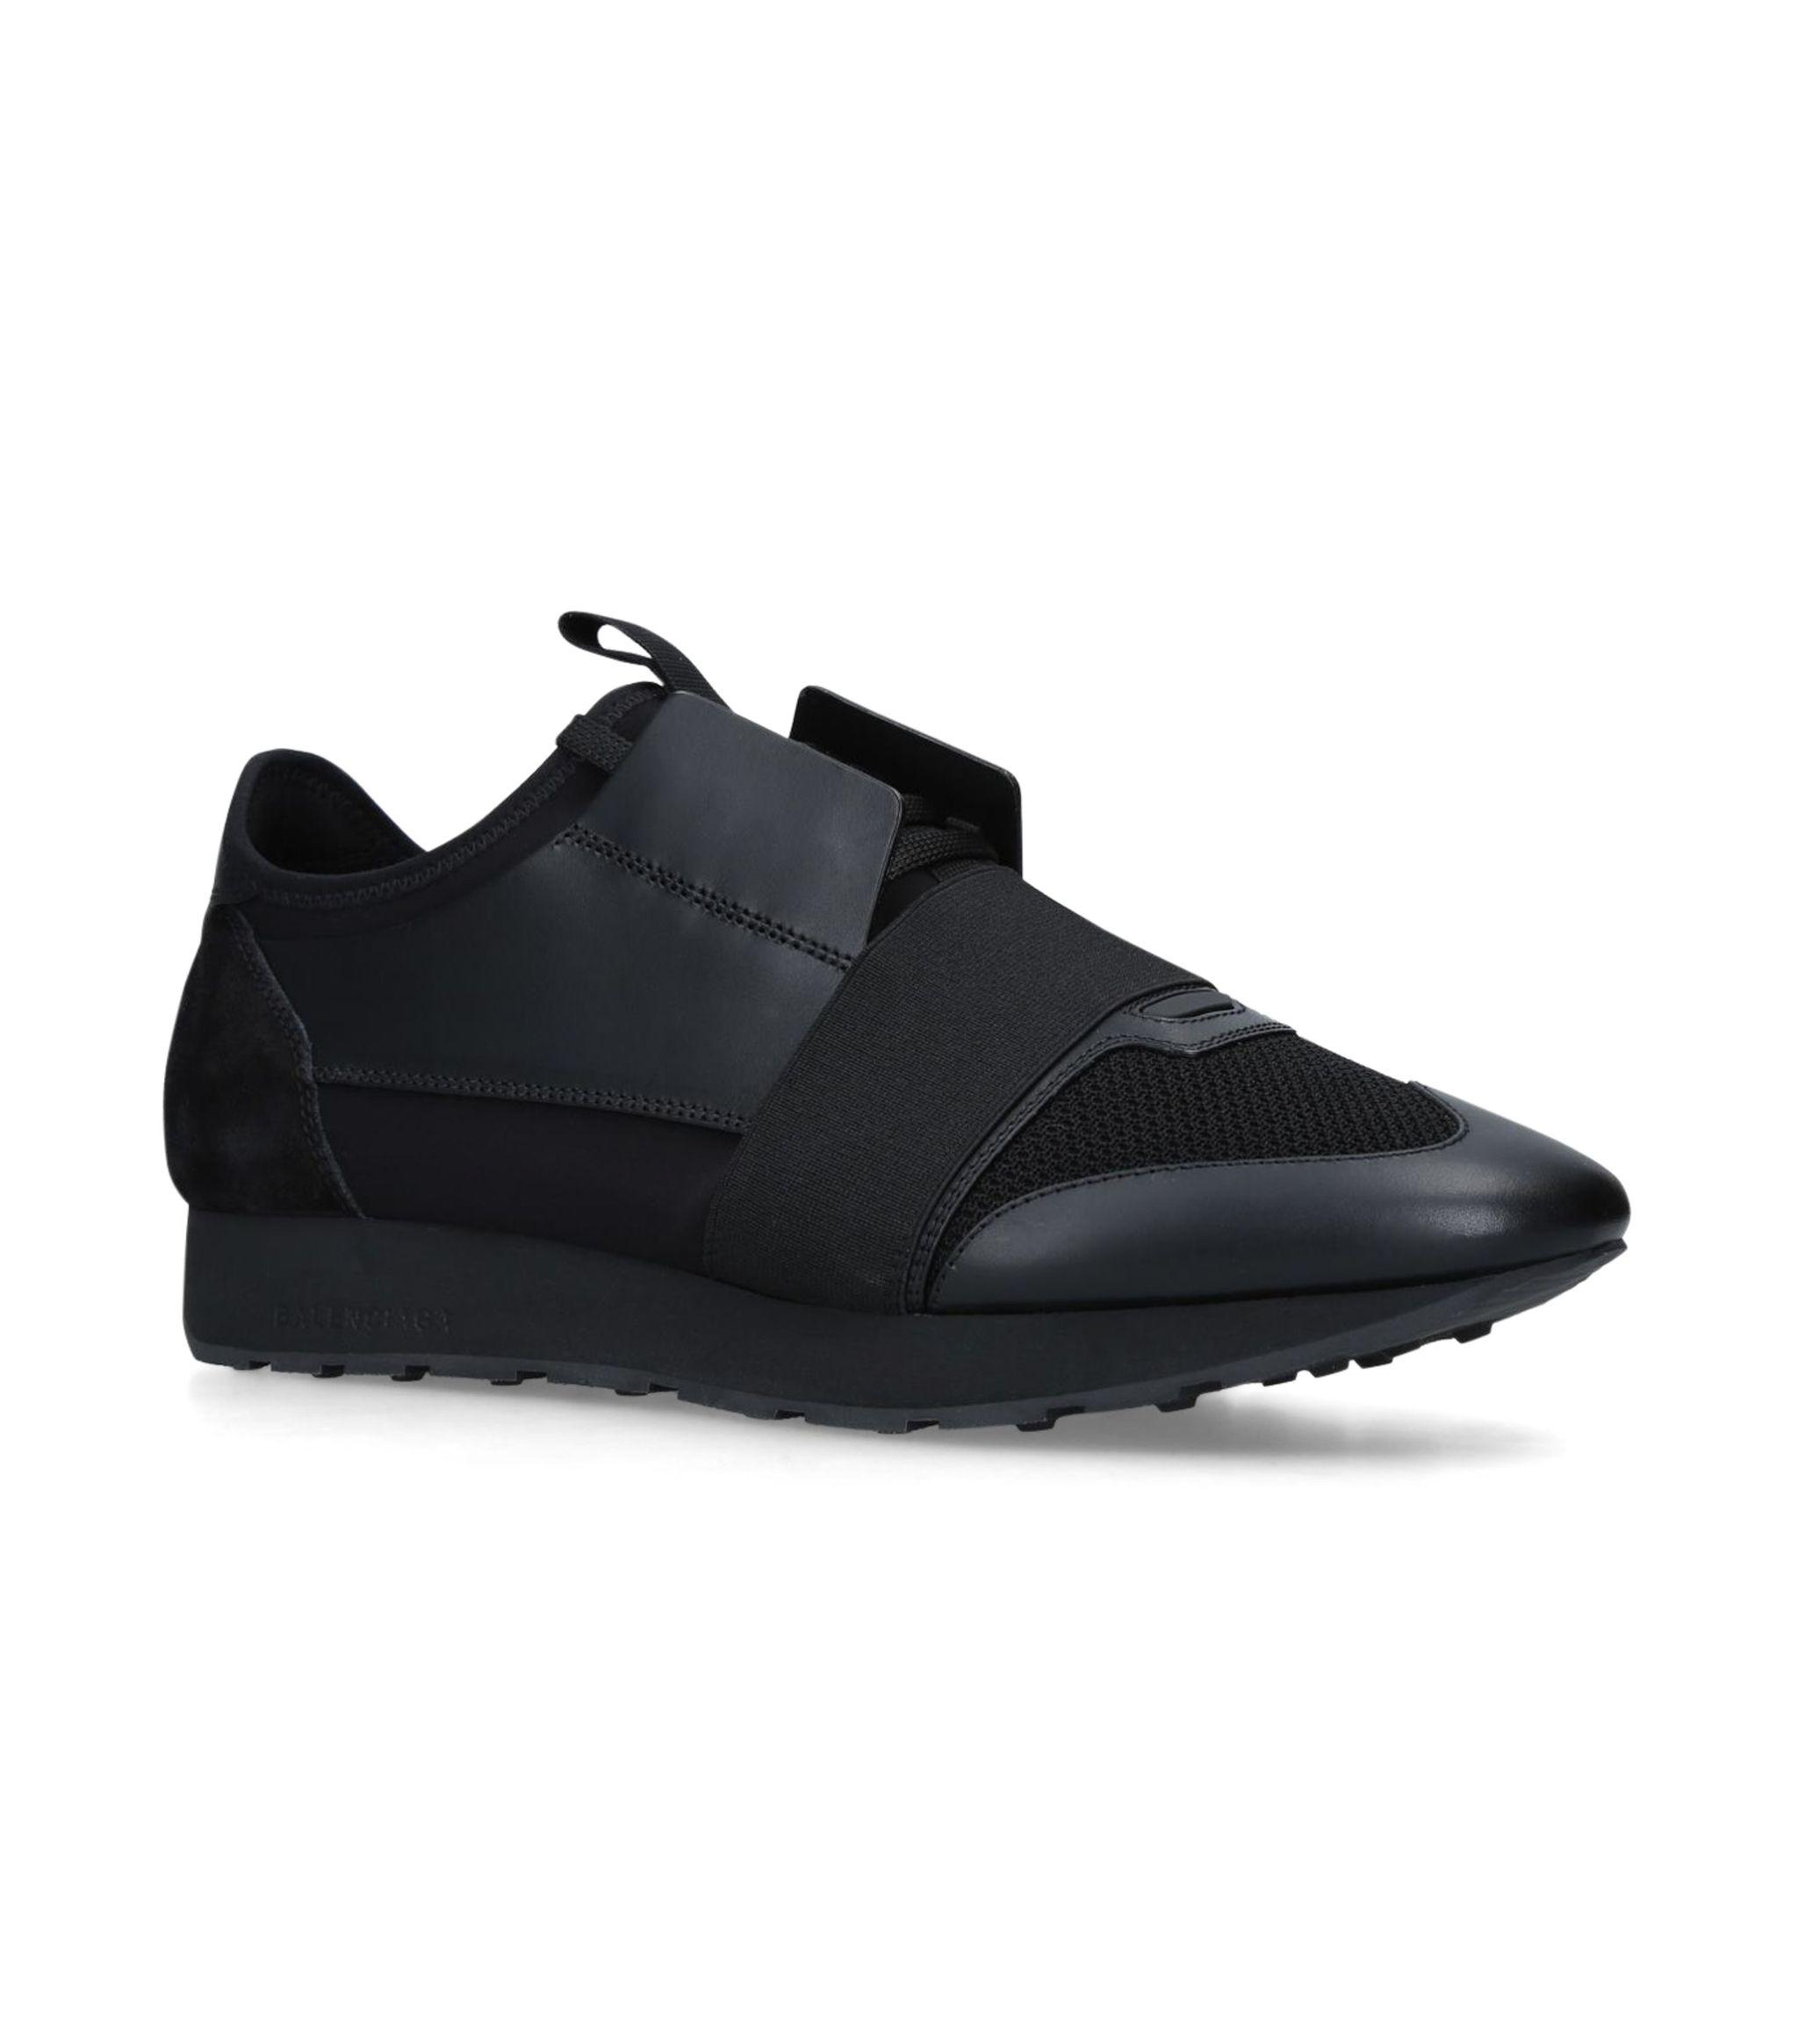 Balenciaga Leather Elastic Runner Sneakers in Black for Men - Save 1% ...